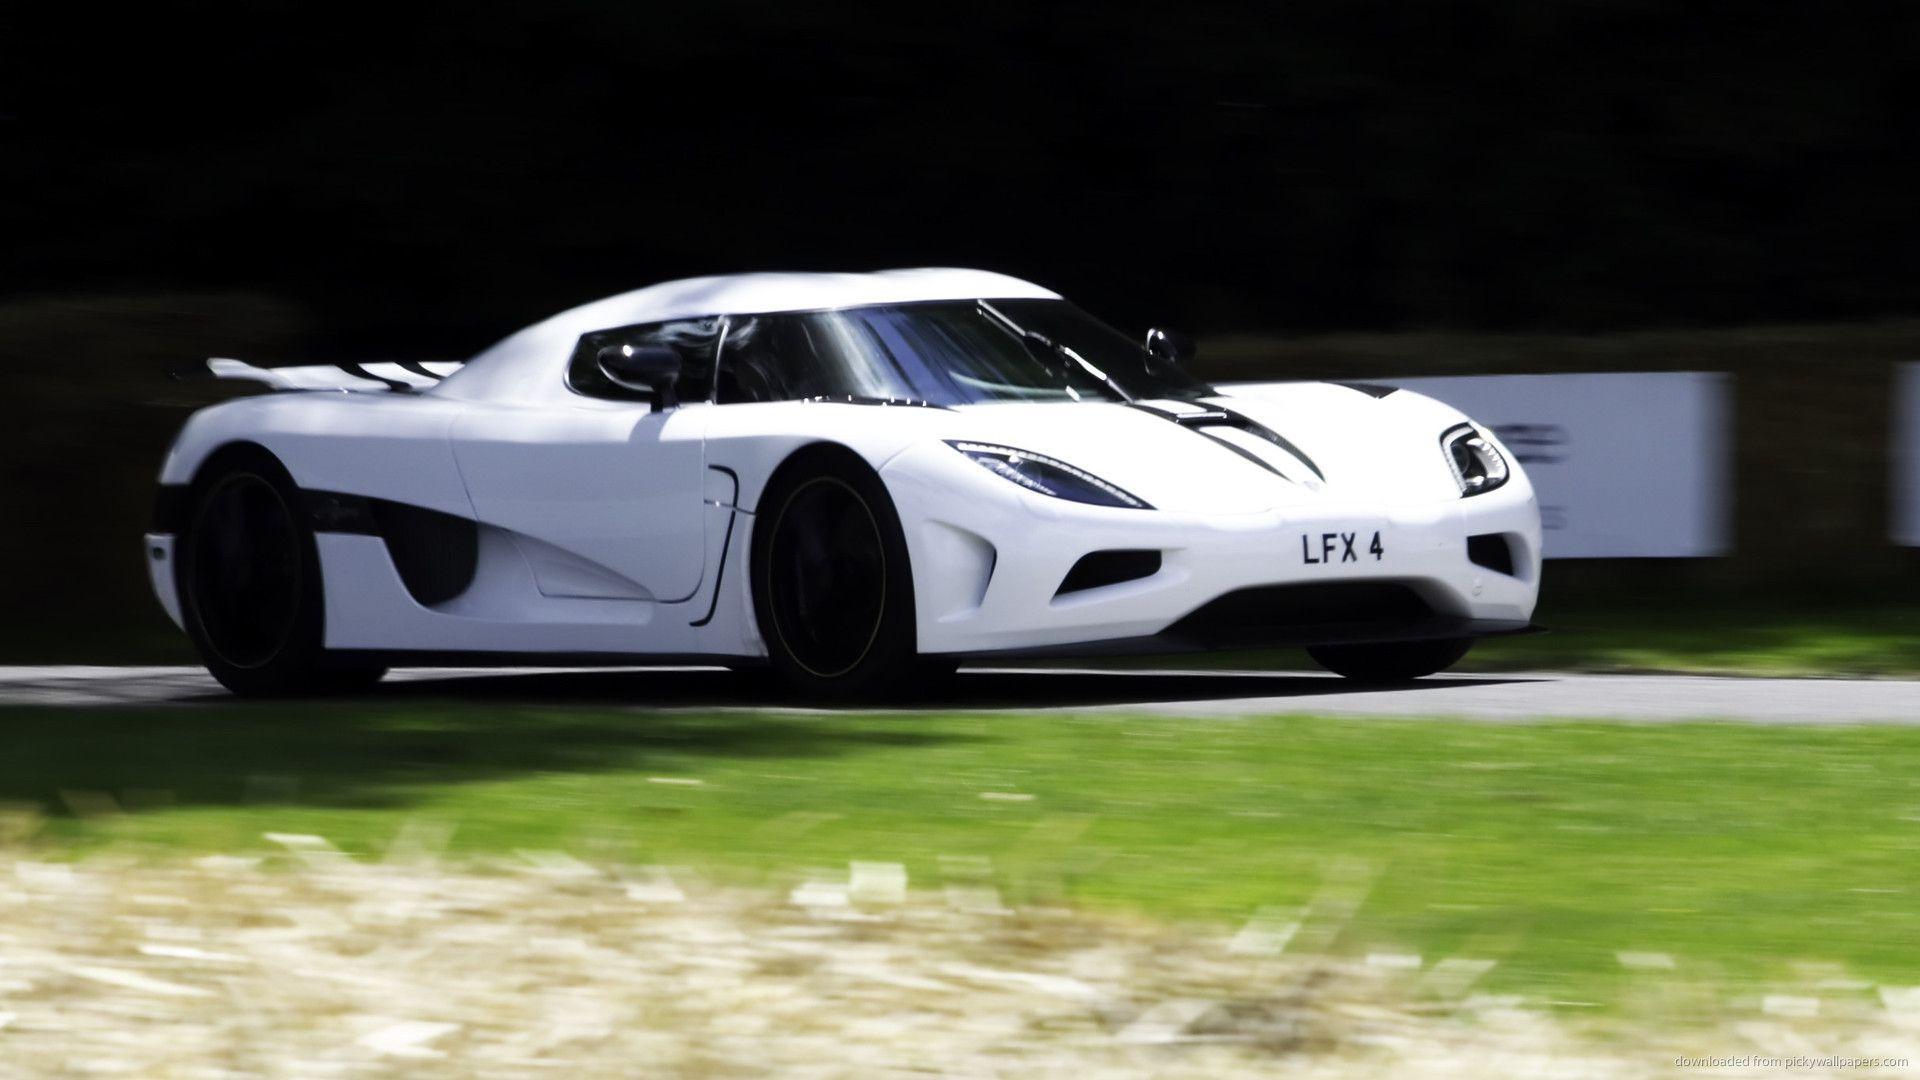 Download 1920x1080 Koenigsegg Agera R By Andrew Basterfield Wallpaper